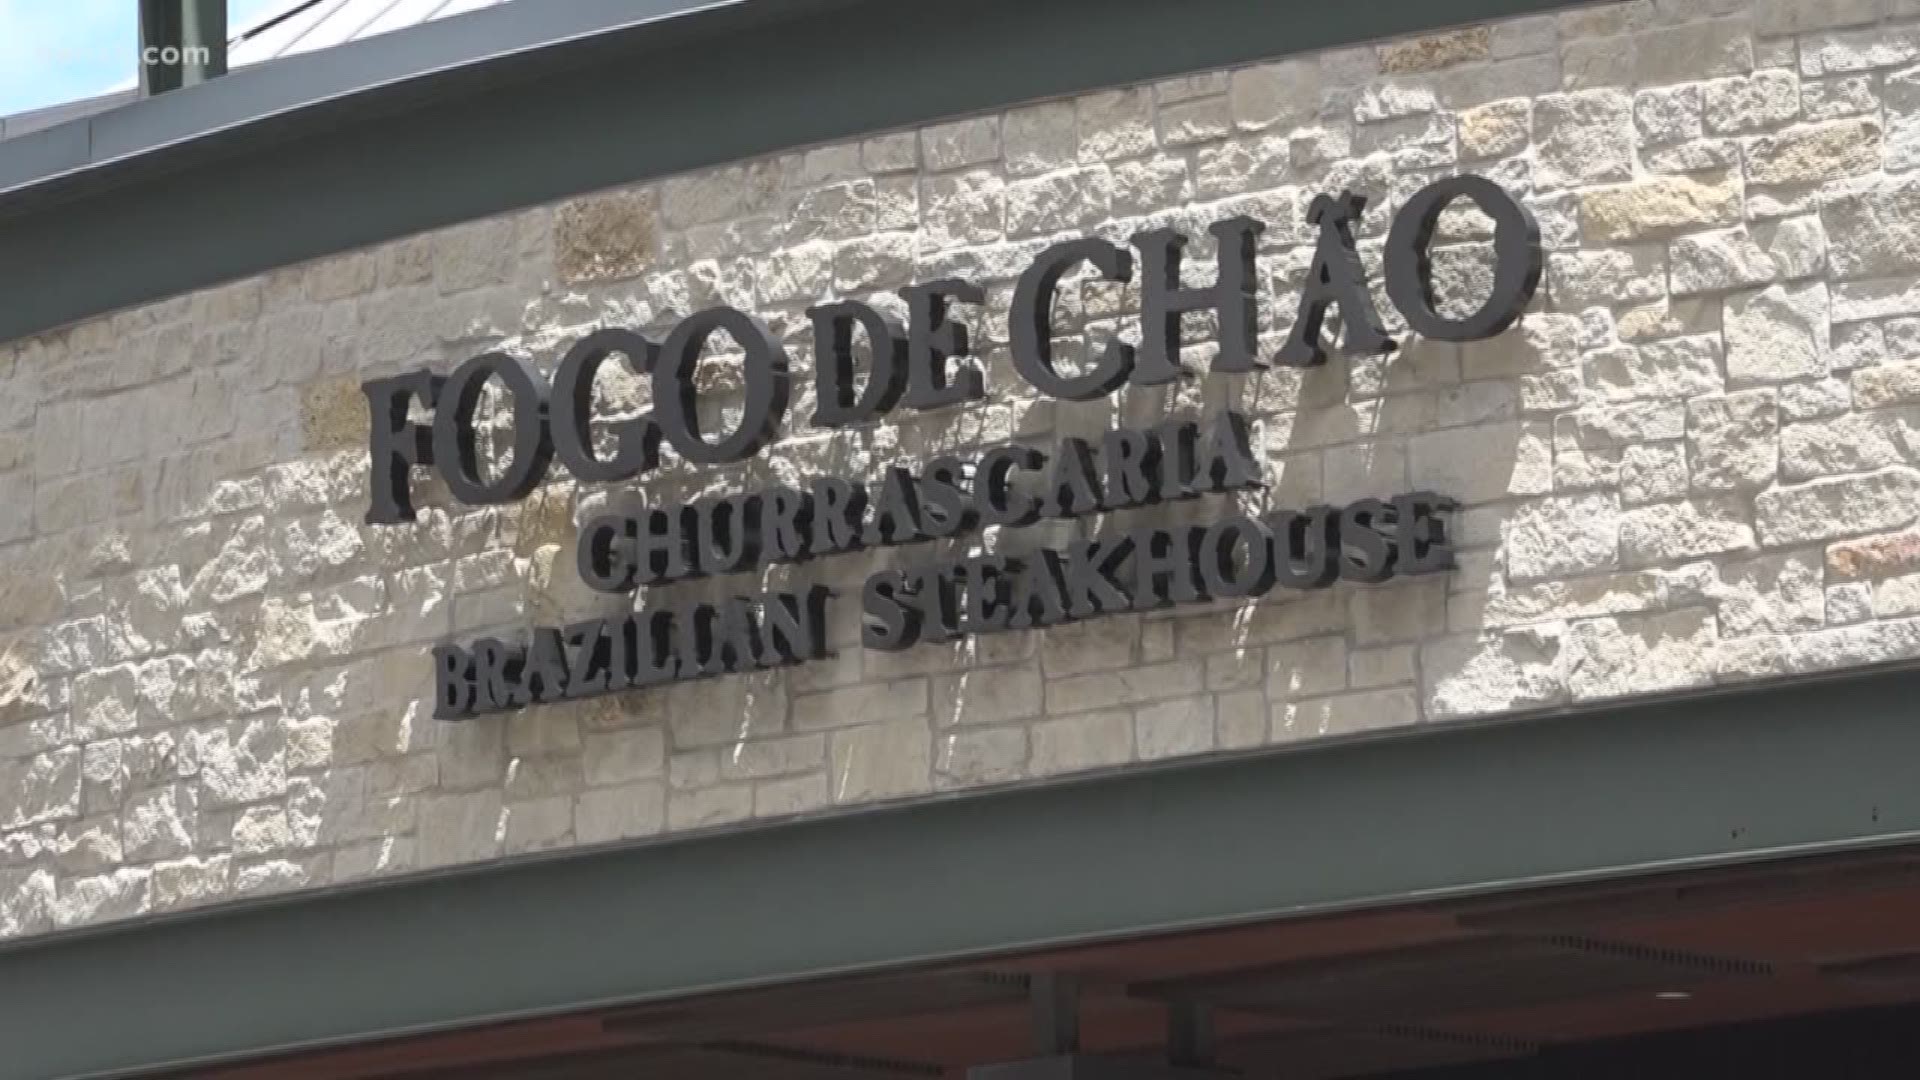 A San Antonio restaurant is apologizing after an employee kicked out an SAPD officer for carrying a gun. This sparked a firestorm online, with some calling it an honest mistake and others calling on the restaurant to do more than just apologize.